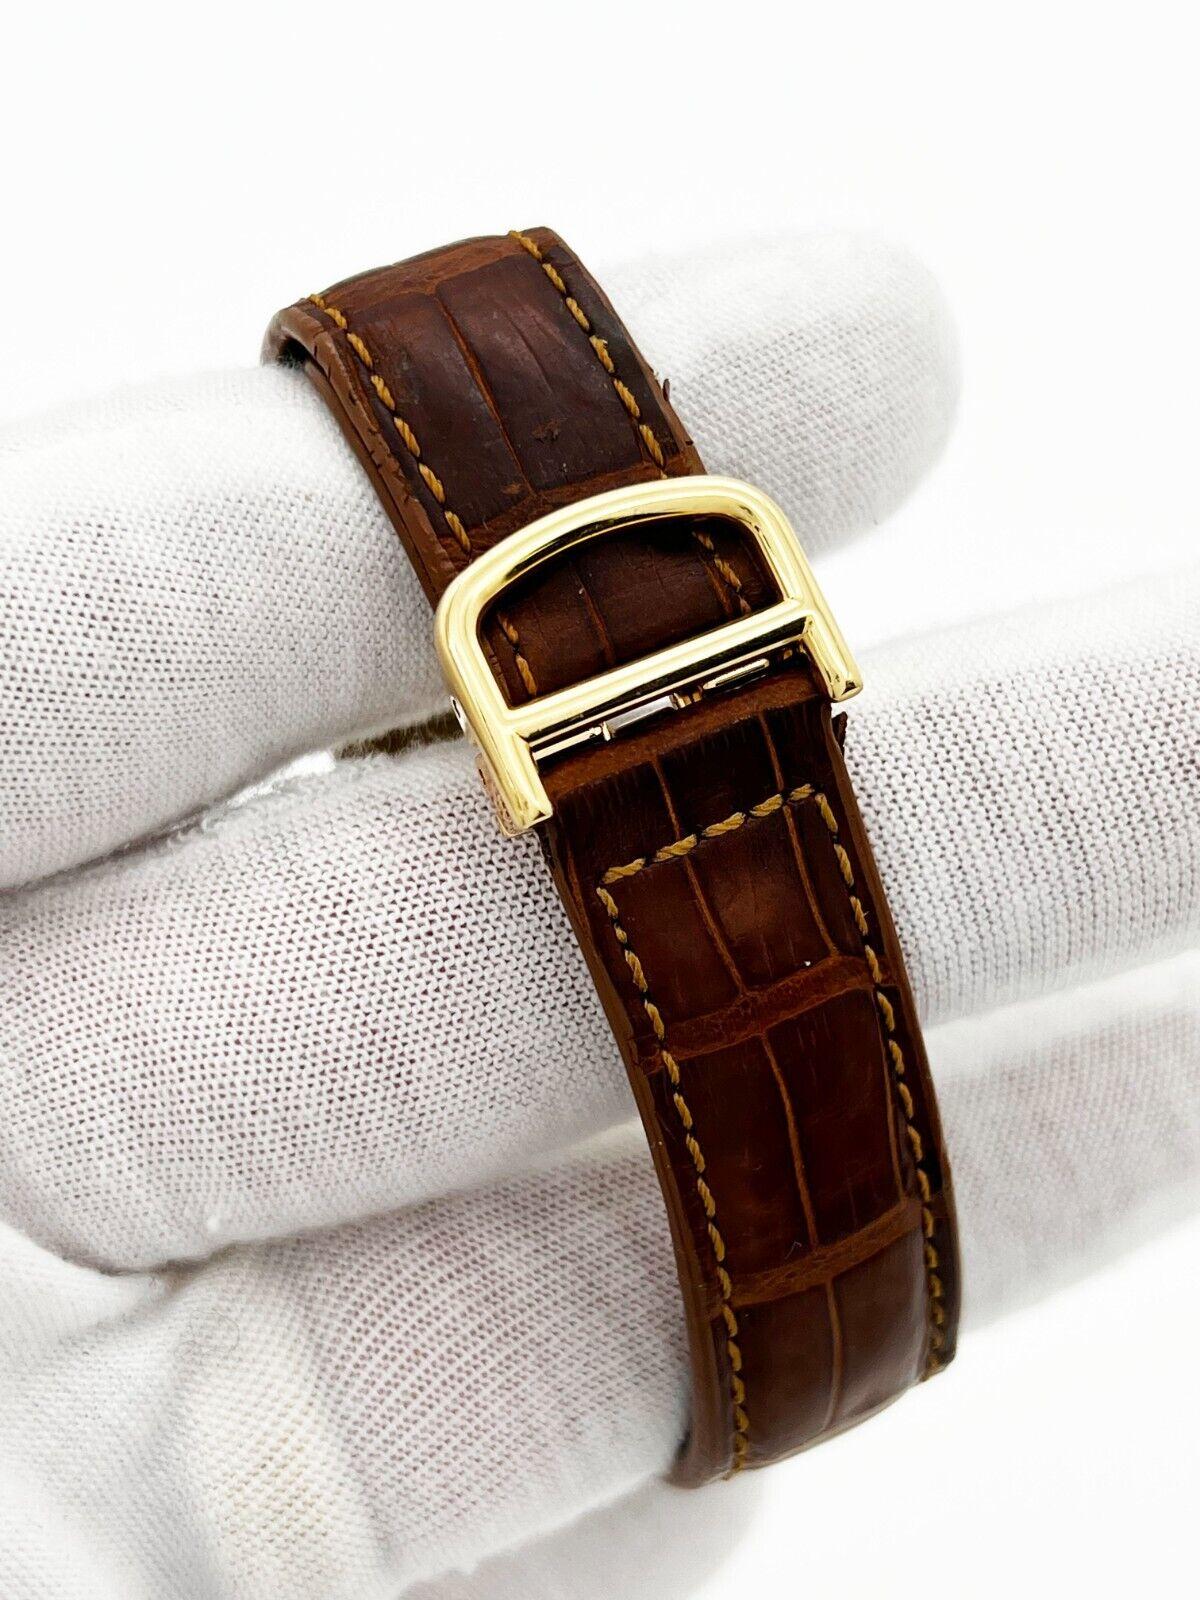 Cartier Pasha Ref 1353 Chronograph 18K Yellow Gold 35mm Leather Strap For Sale 1